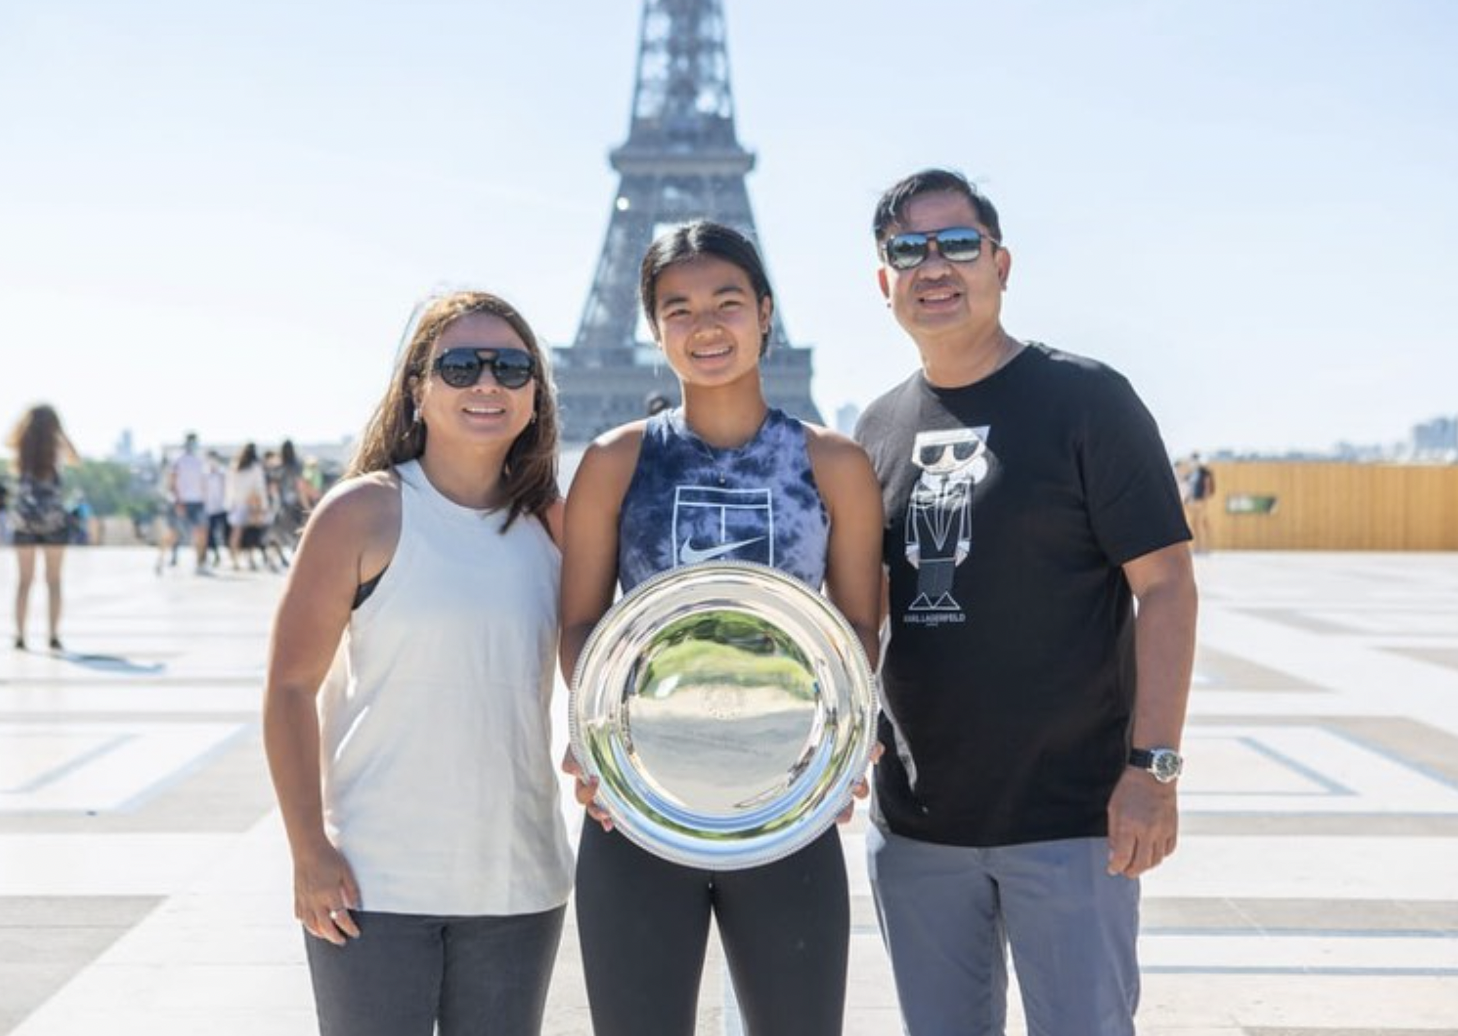 Alex Eala knows she can count on her parents being there for her, through wins and losses.